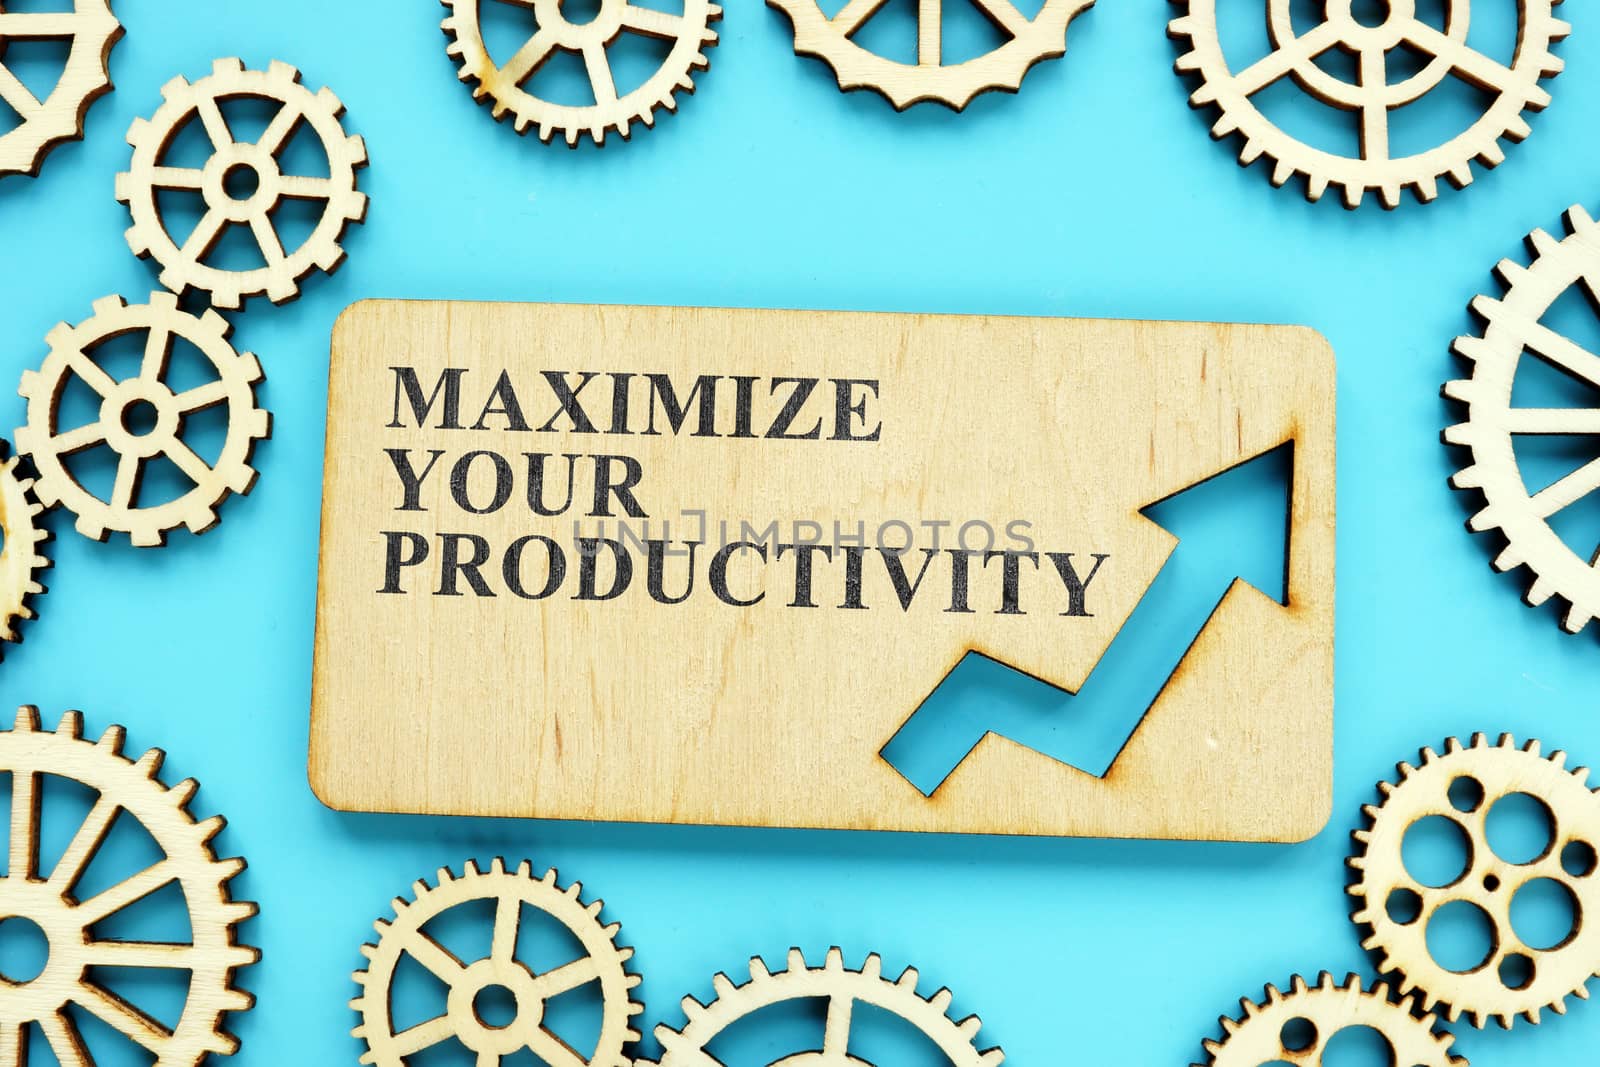 Maximize Your Productivity phrase on the wooden plate and gears. by designer491